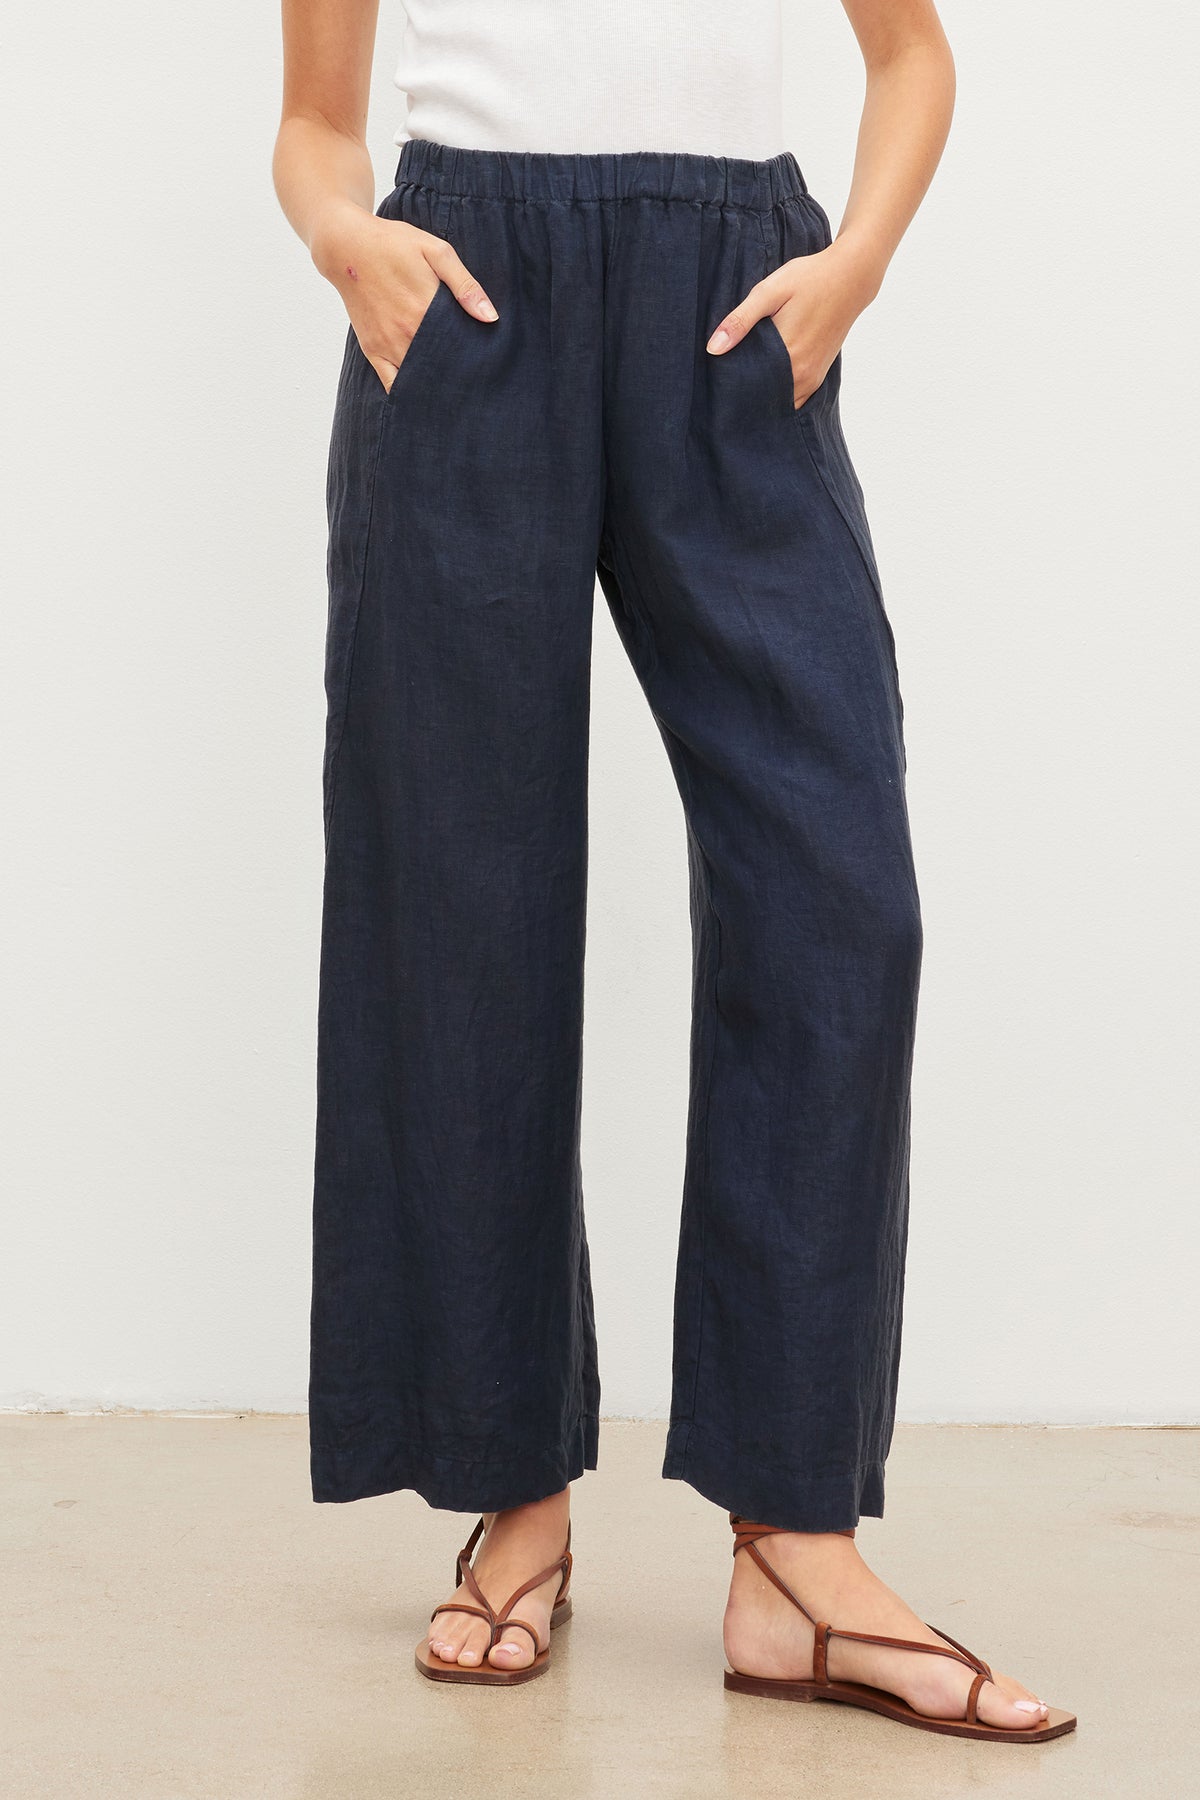   Person standing in LOLA LINEN PANT from Velvet by Graham & Spencer with an elastic waist, paired with metallic strap sandals on a neutral background. 